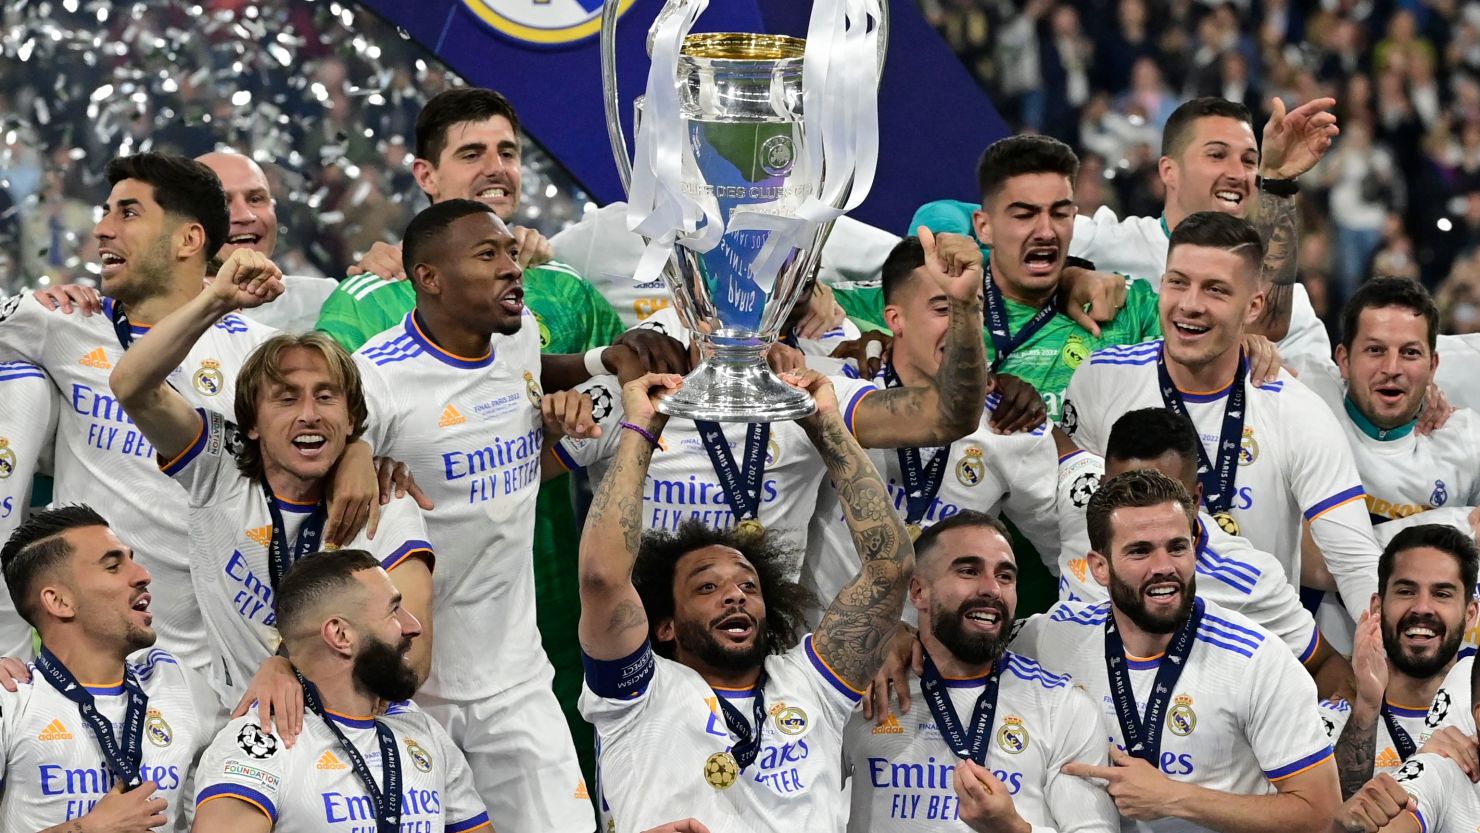 Real Madrid players celebrate after winning the Champions League final against Liverpool at the Stade de France in Paris, on May 28, 2022.